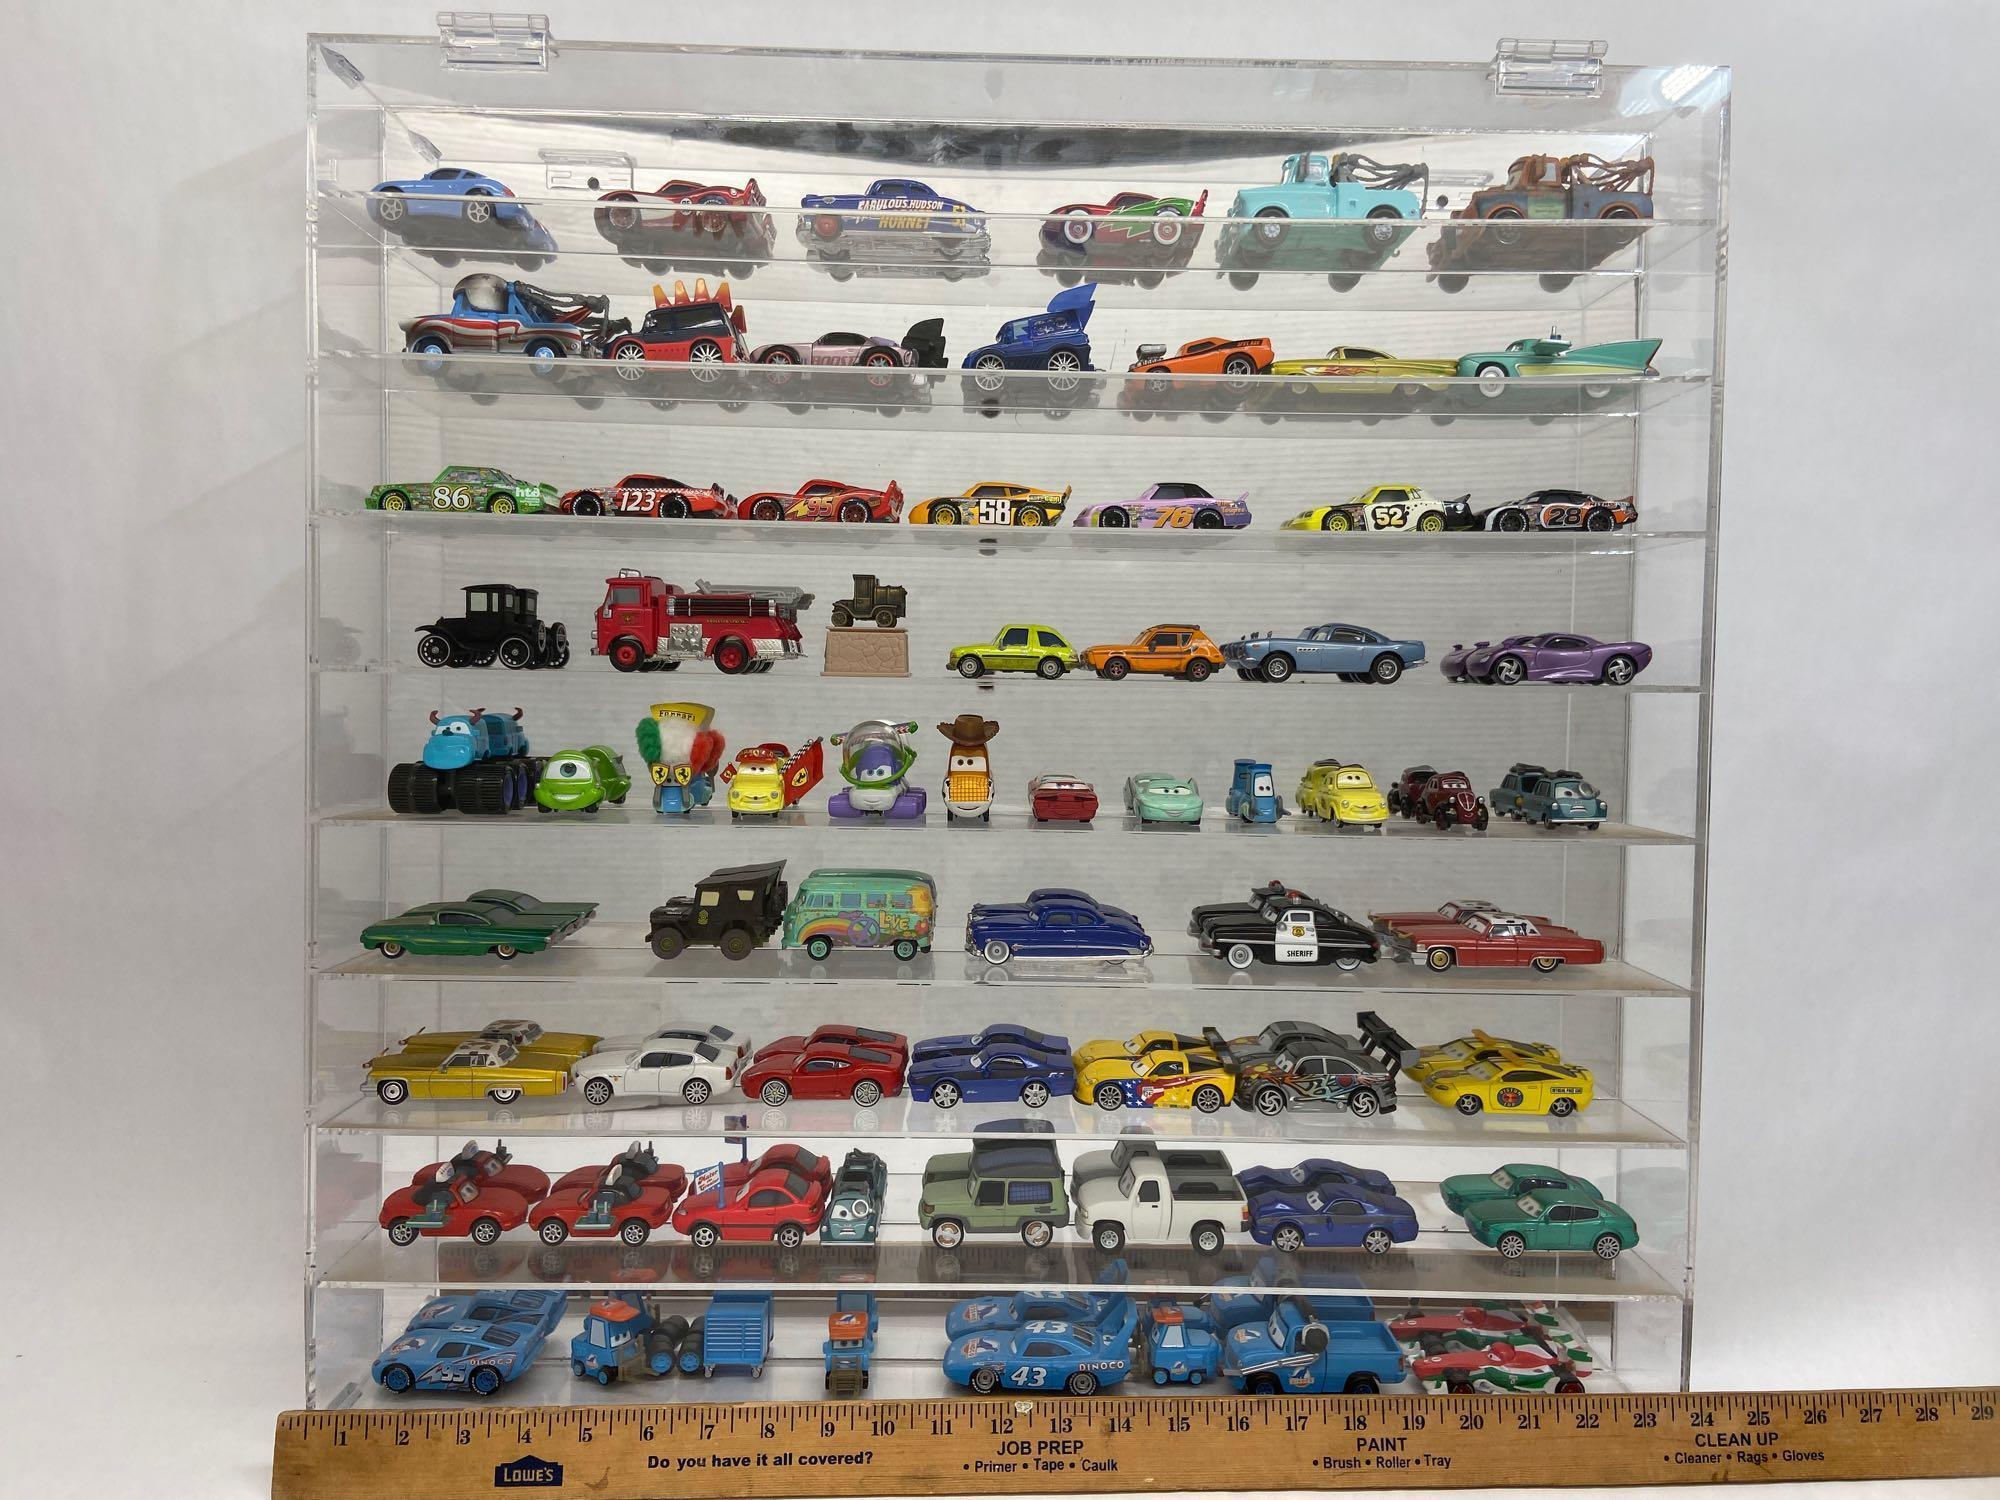 Pixar Cars Toys Collection in Mirrored Display Case 25x24in